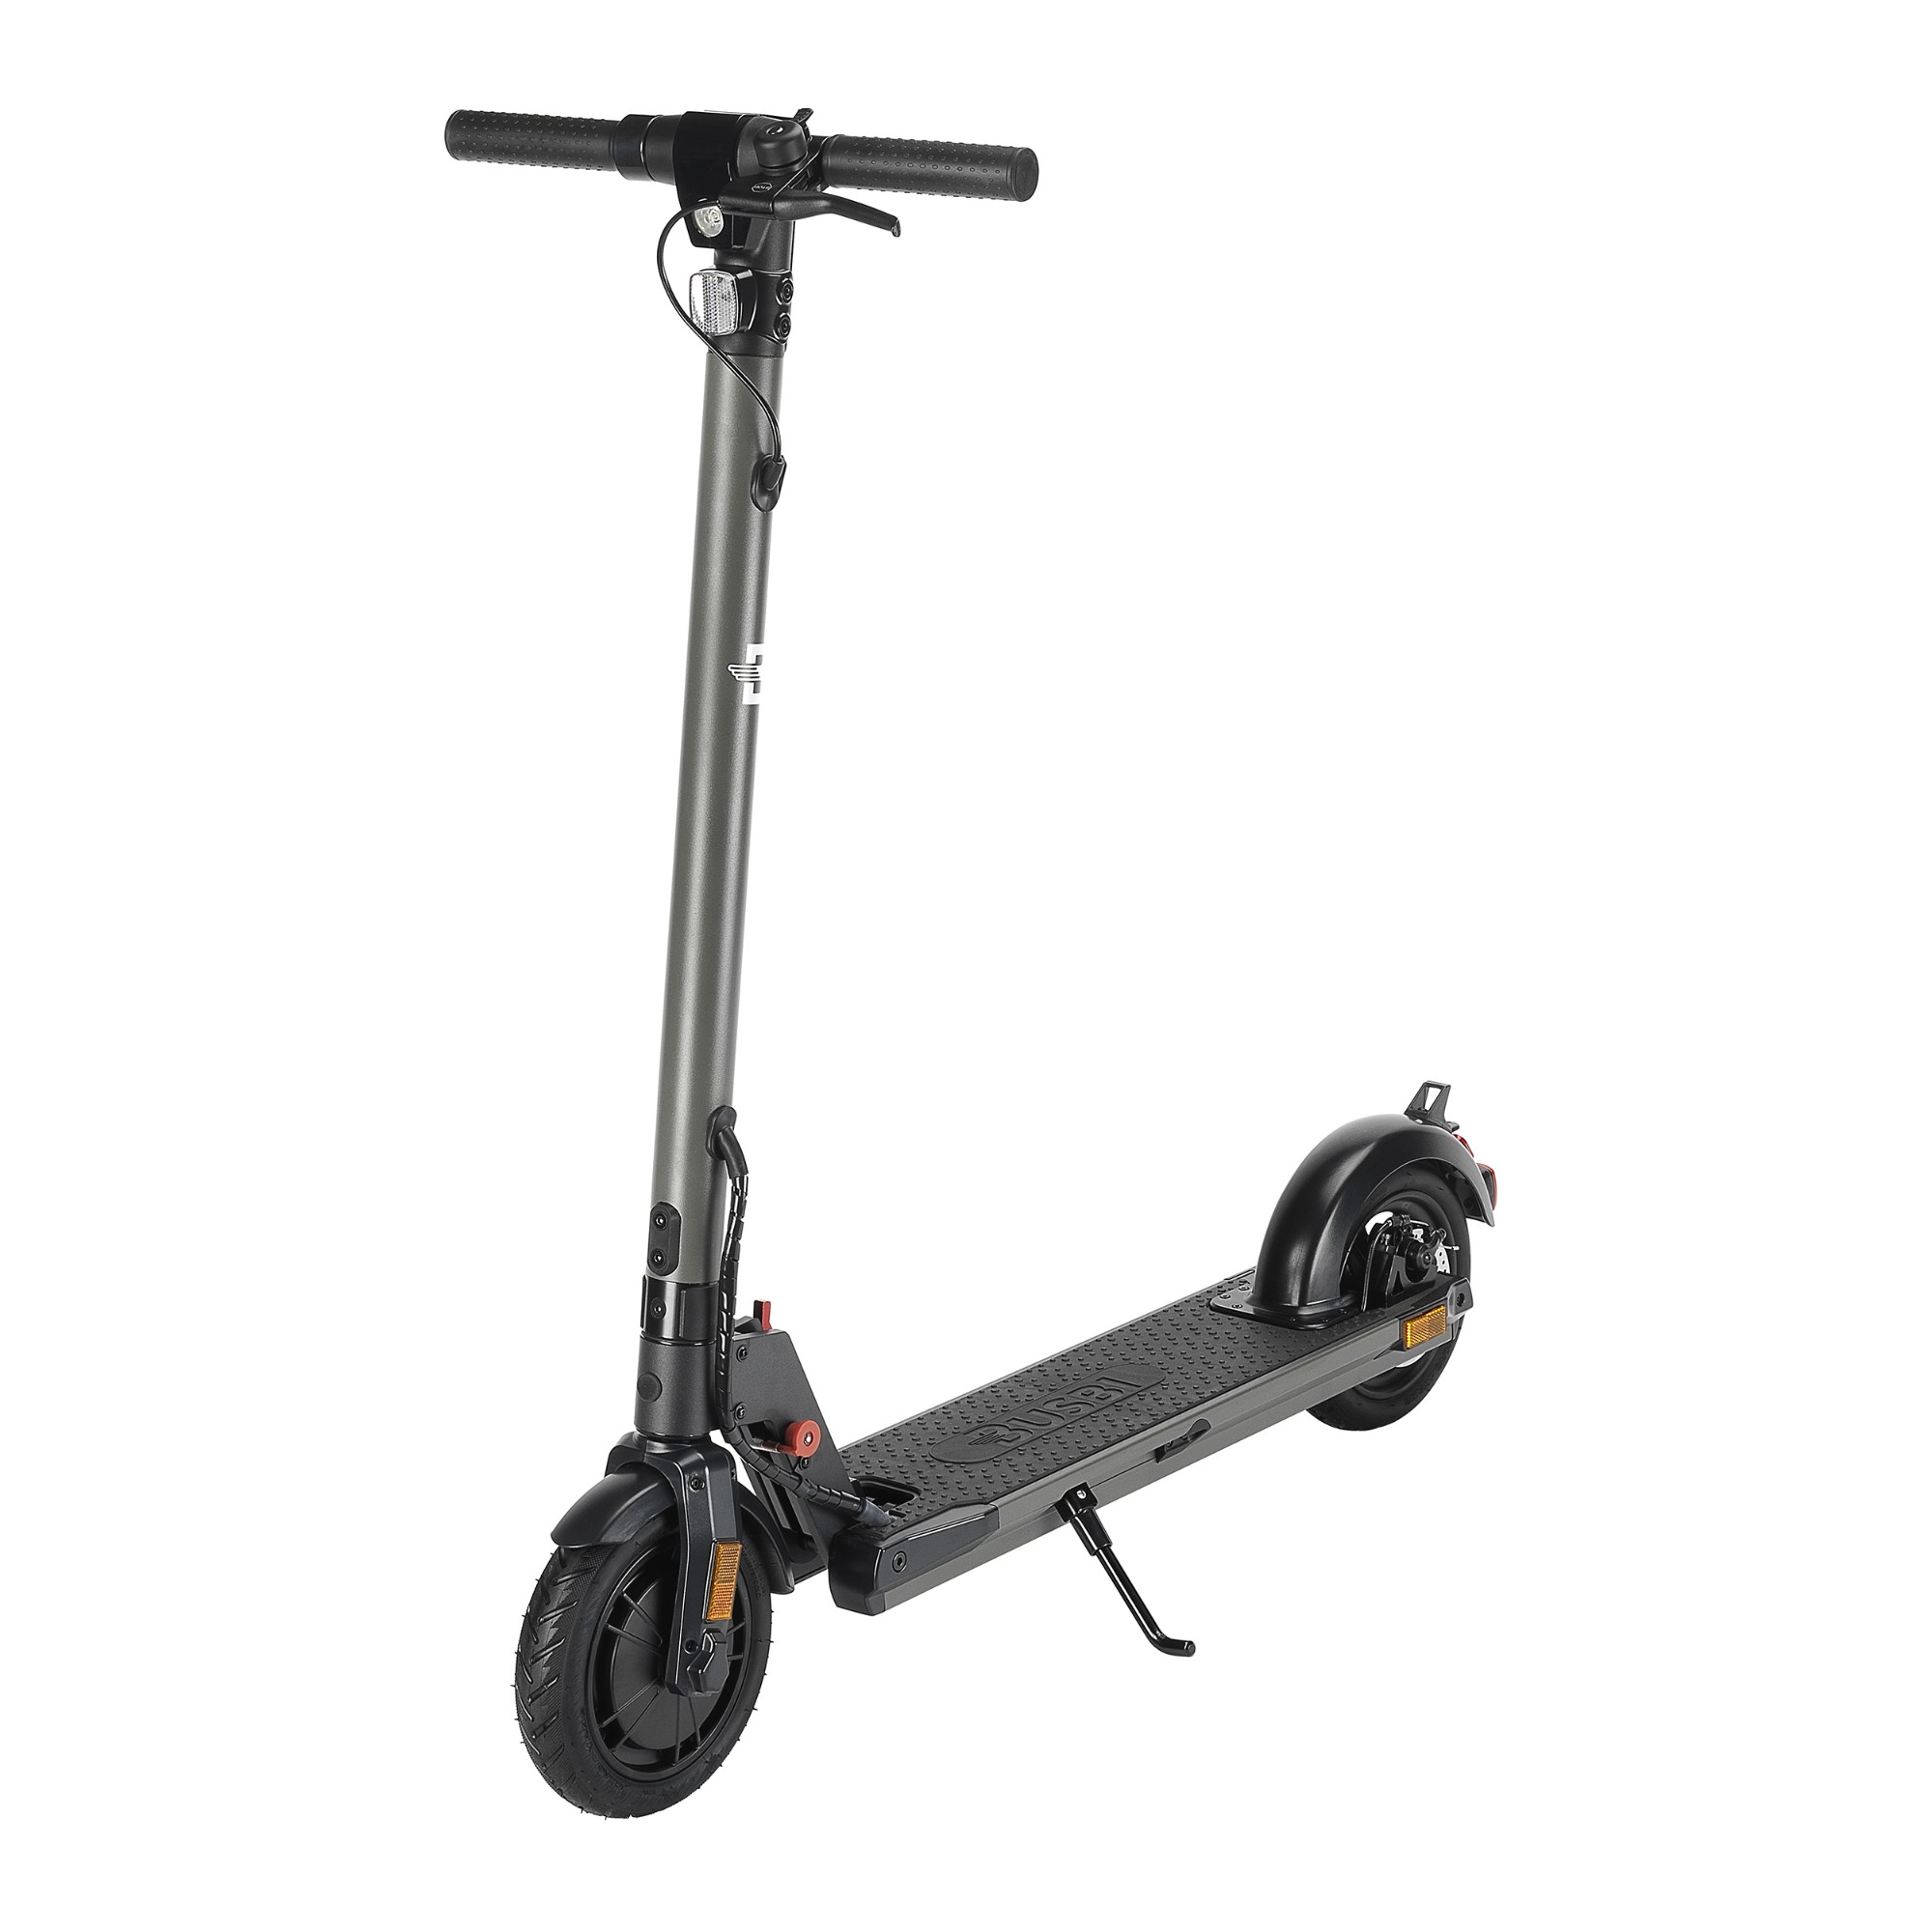 BSB-WSP BUSBI Wasp Electric Scooter - UK